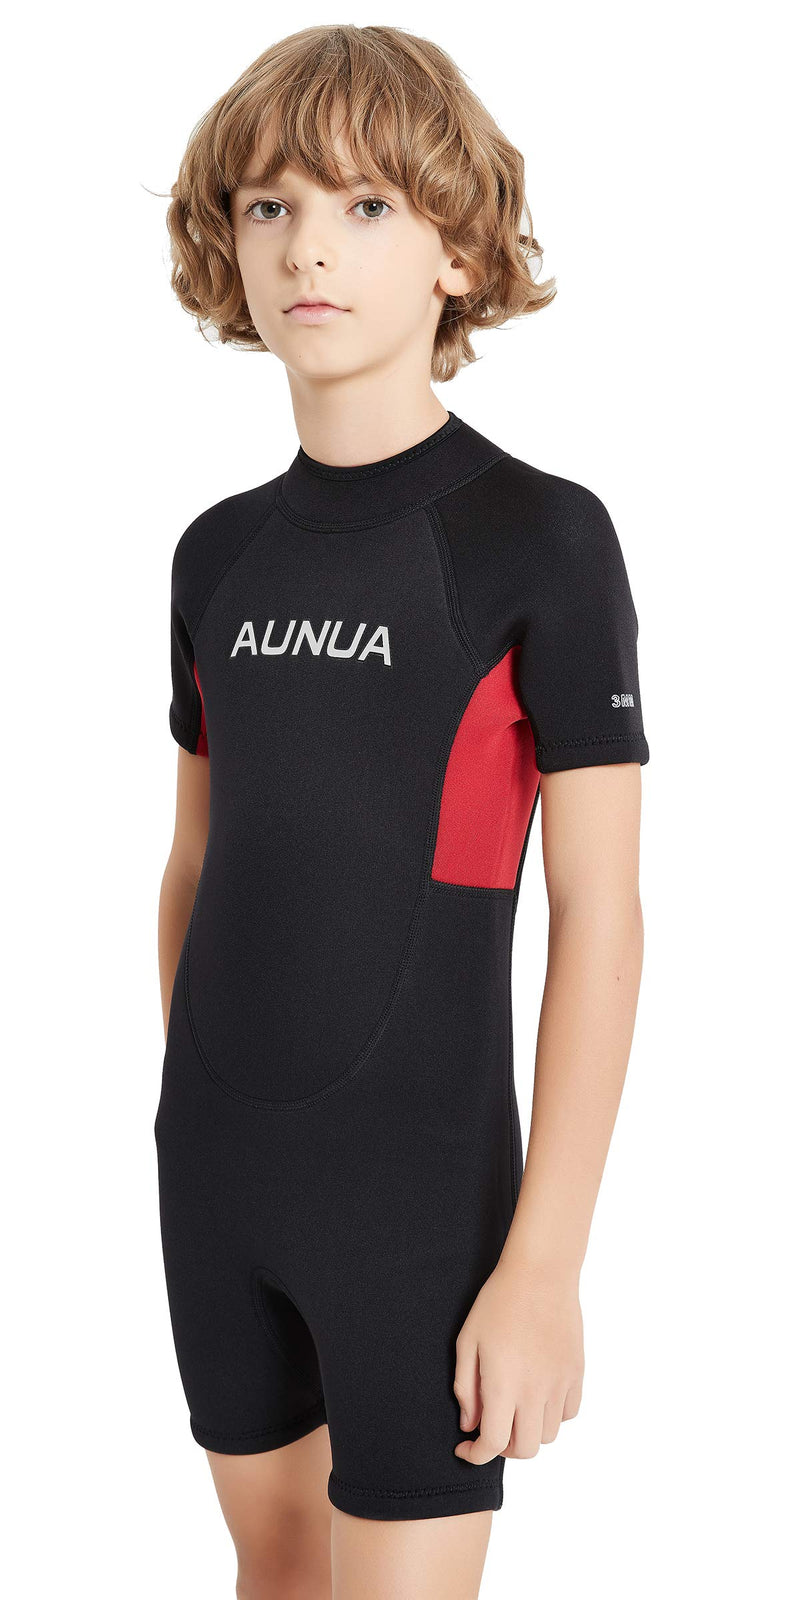 [AUSTRALIA] - Aunua Children's 3mm Youth Swimming Suit Shorty Wetsuits Neoprene for Kids Keep Warm Black Red 8 